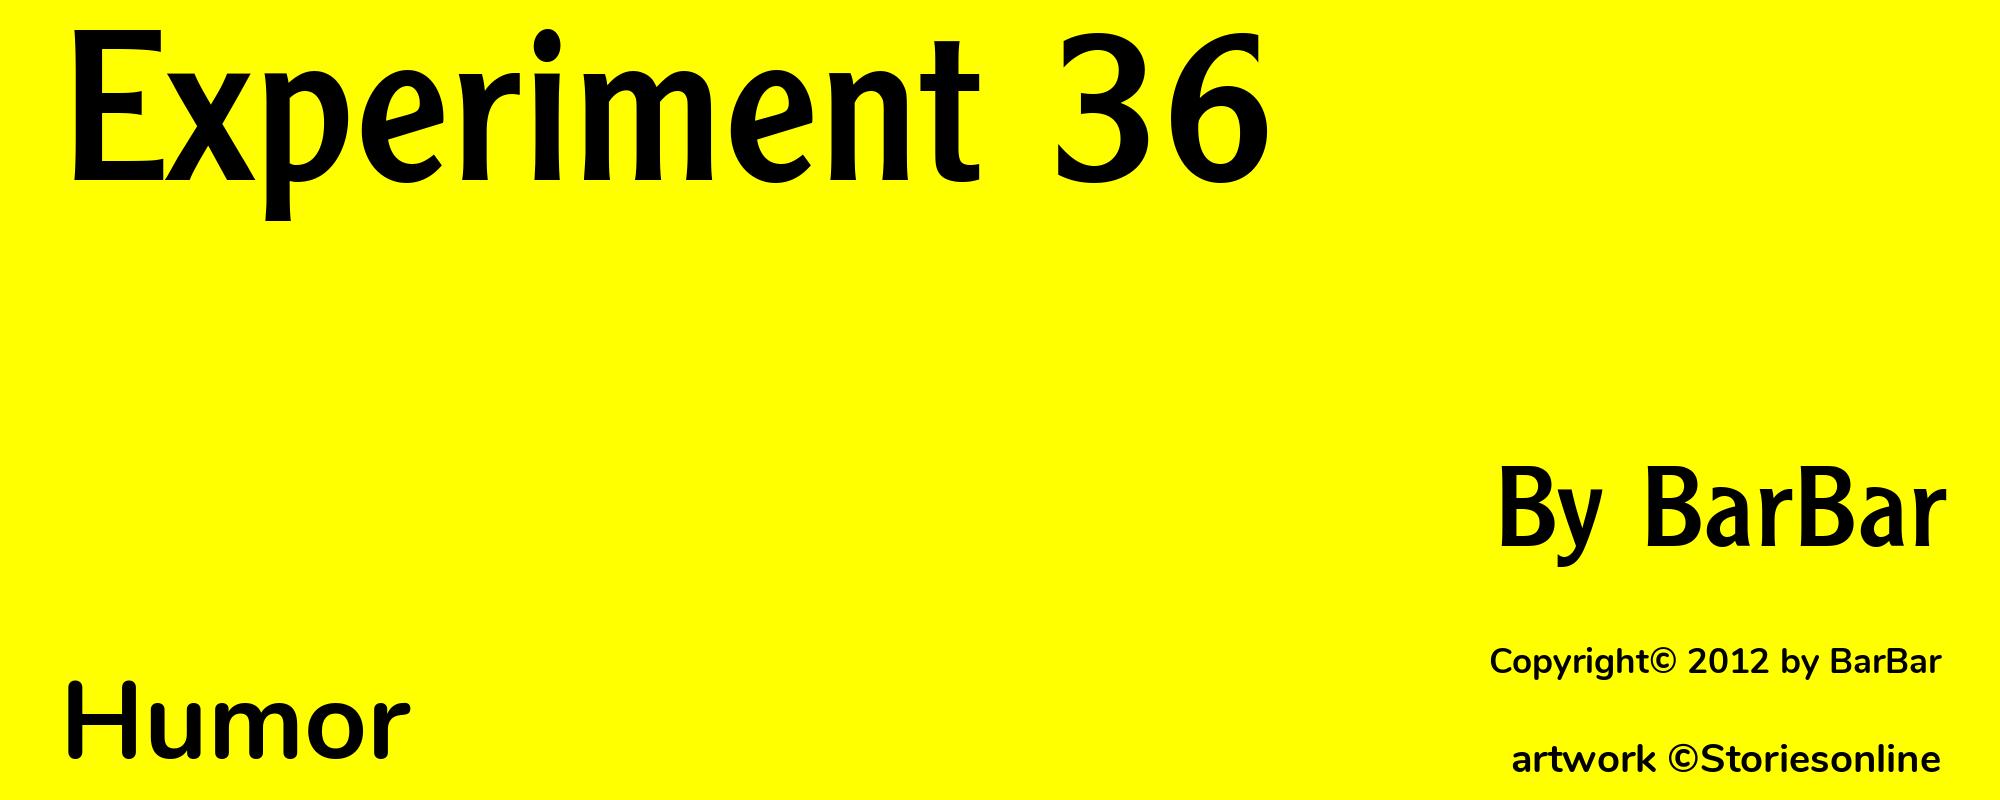 Experiment 36 - Cover